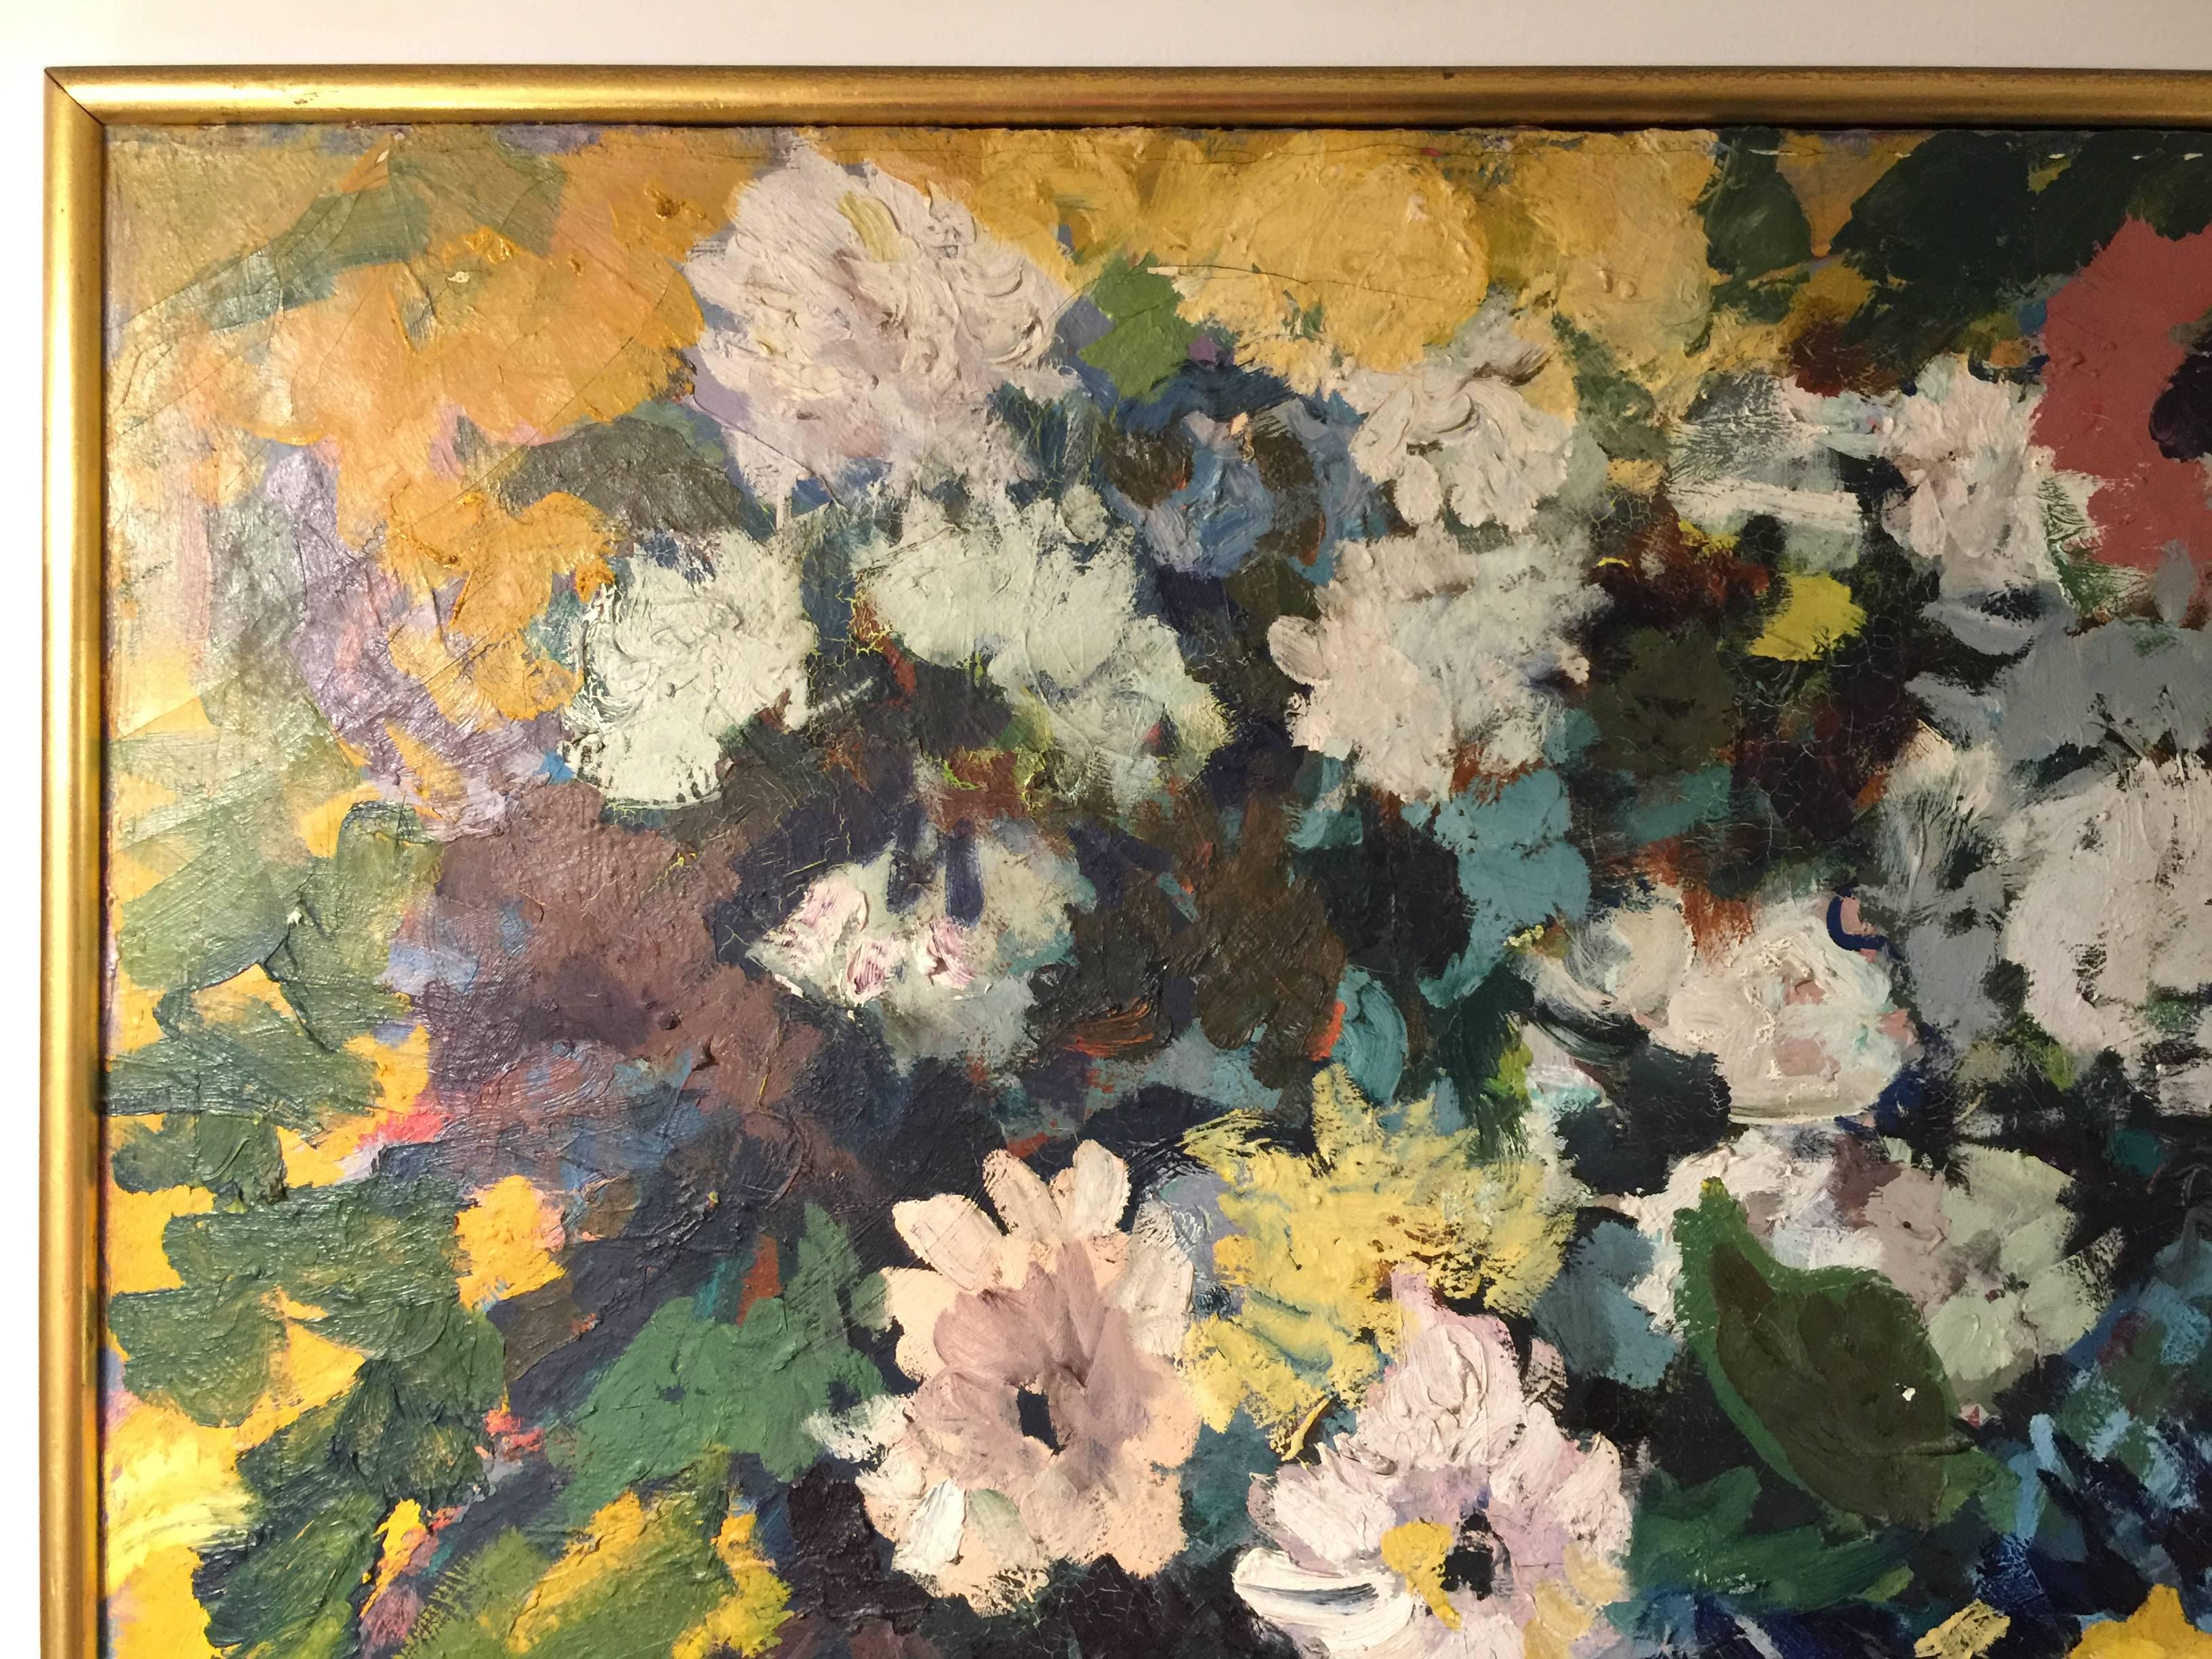 A beautiful 1950s or 1960s floral still life painting, strong brushstrokes and impasto. The green and gold background really sets the stage for the full color blooms. The oil on canvas painting measures 40